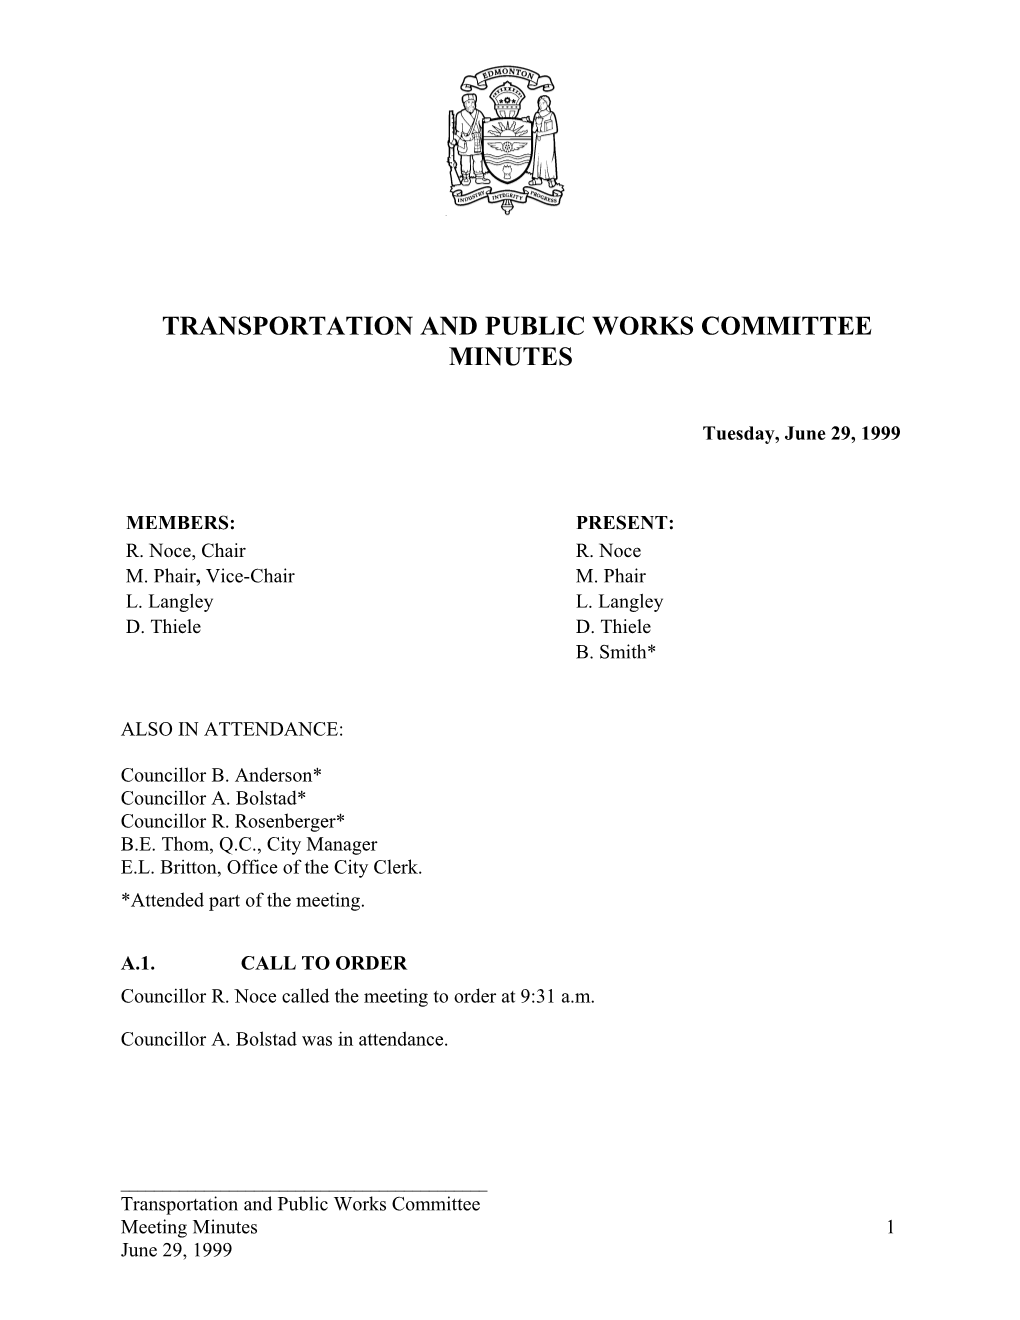 Minutes for Transportation and Public Works Committee June 29, 1999 Meeting